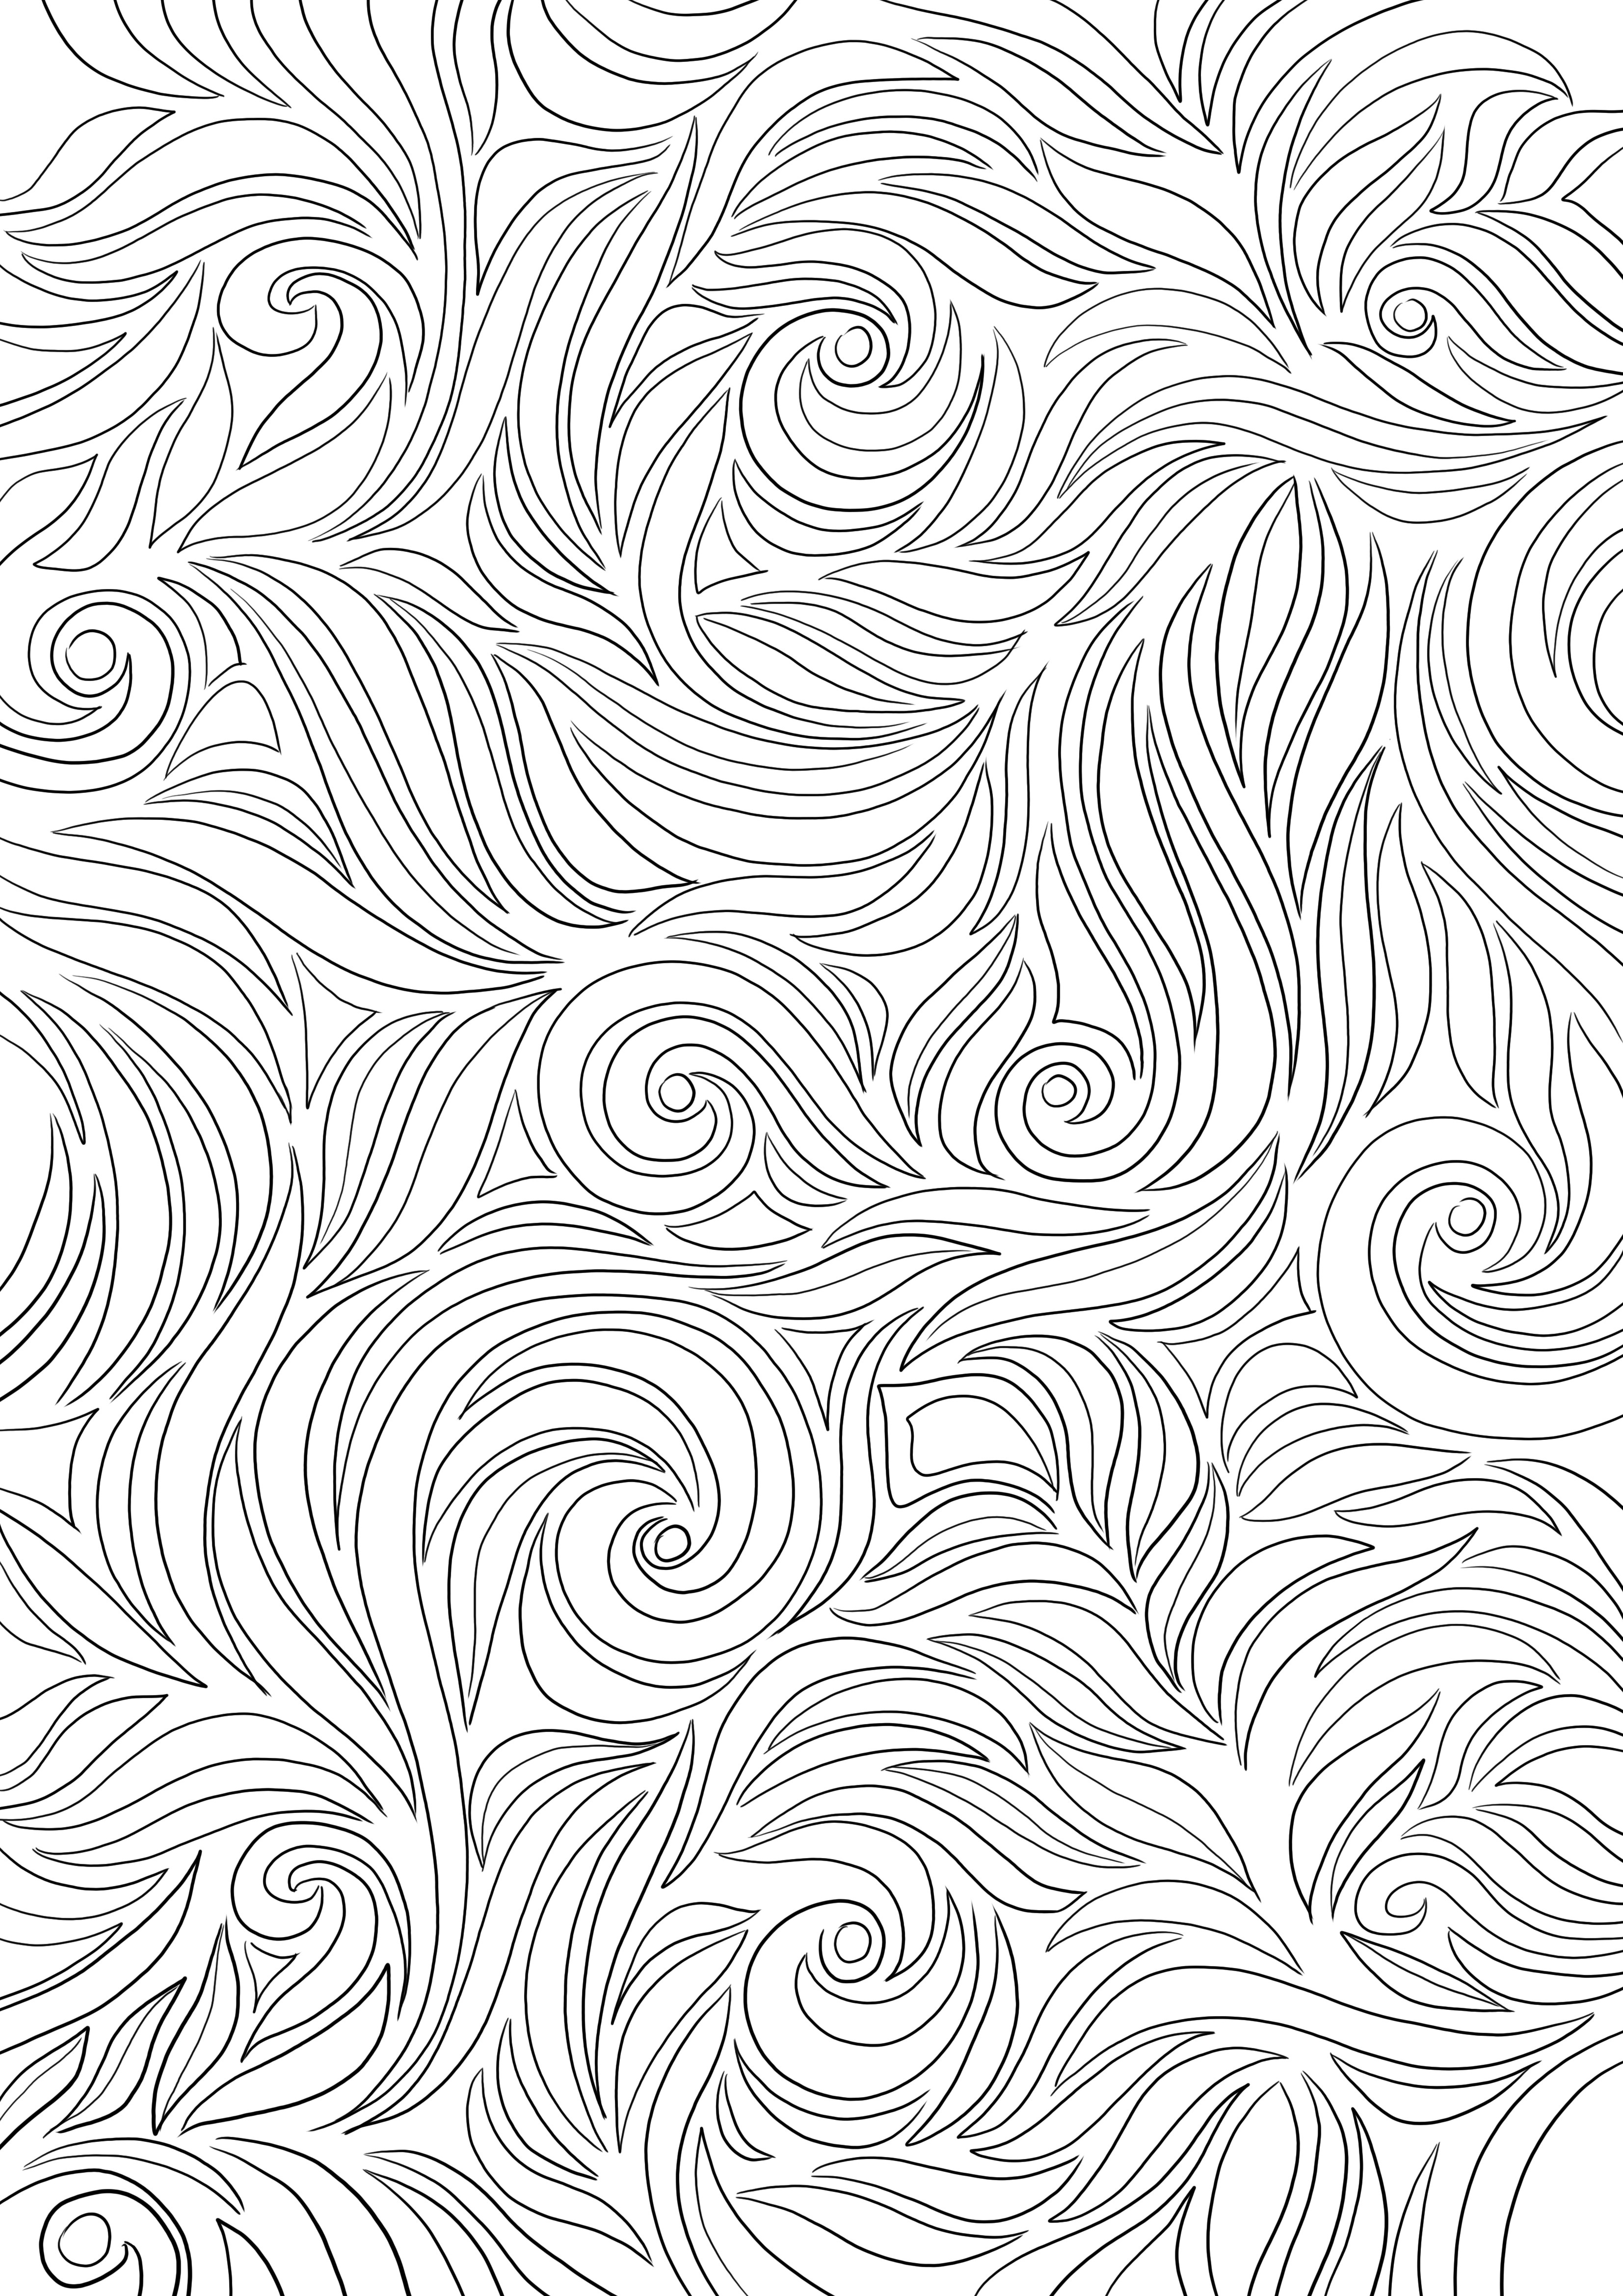 Swirl Pattern free coloring and printing image- perfect way to learn about arts